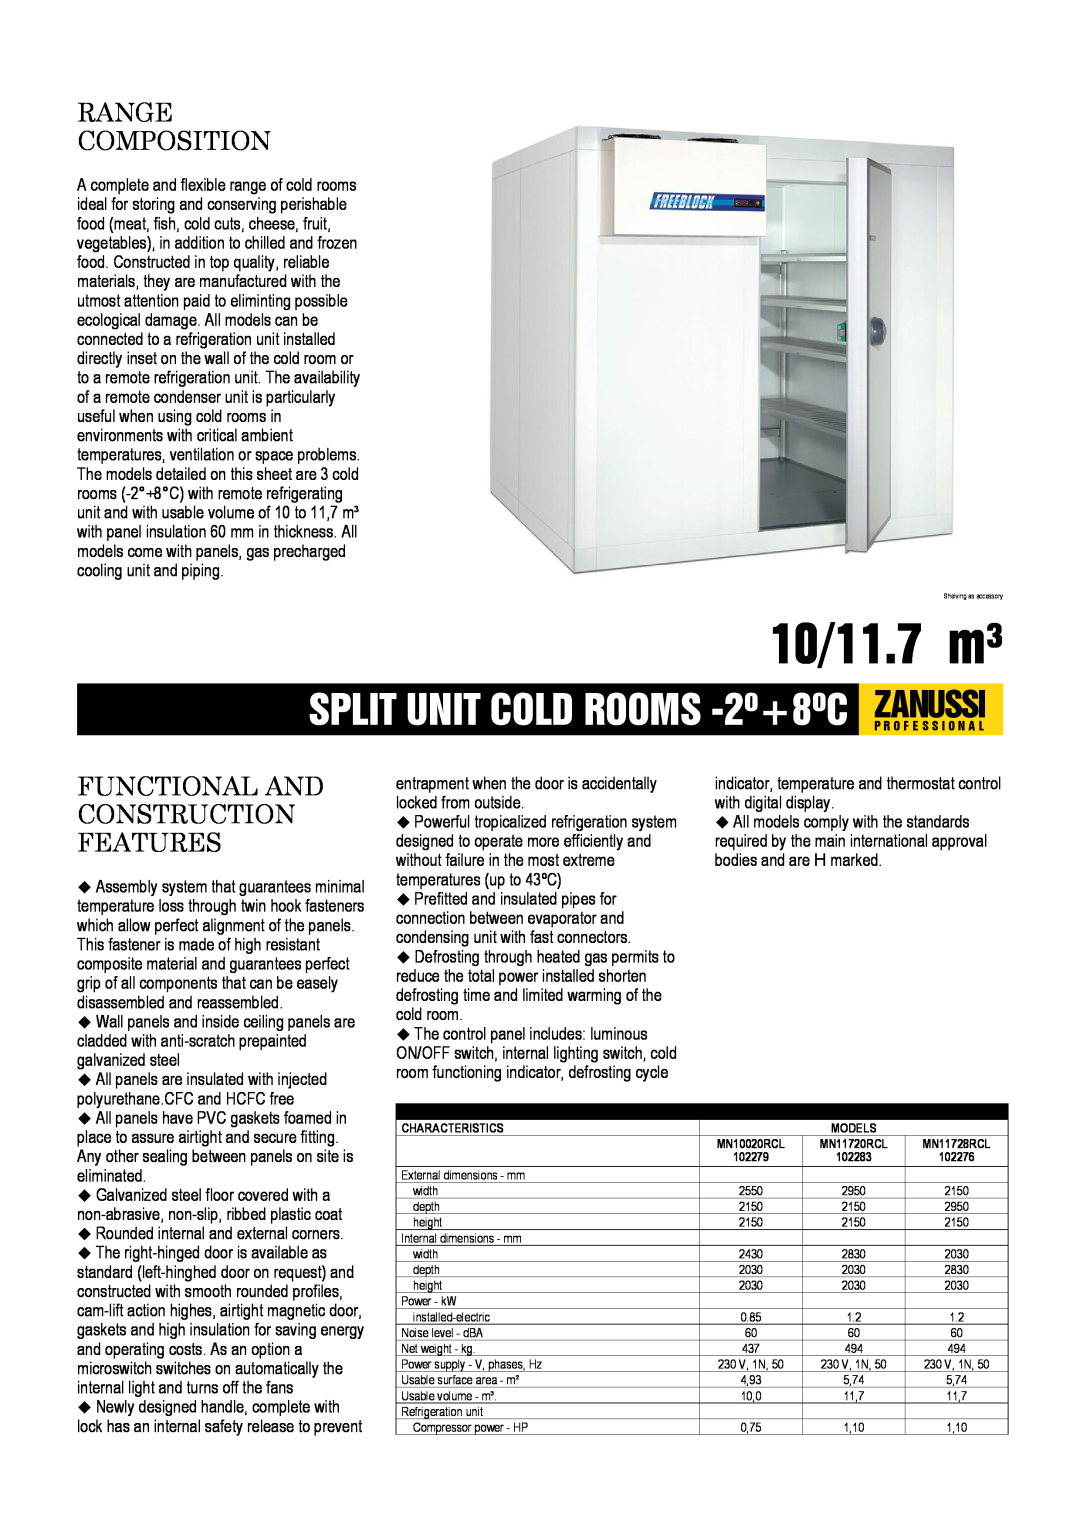 Zanussi MN10020RCL, MN11720RCL, MN11728RCL dimensions 10/11.7 m³, Range Composition, Functional And Construction Features 